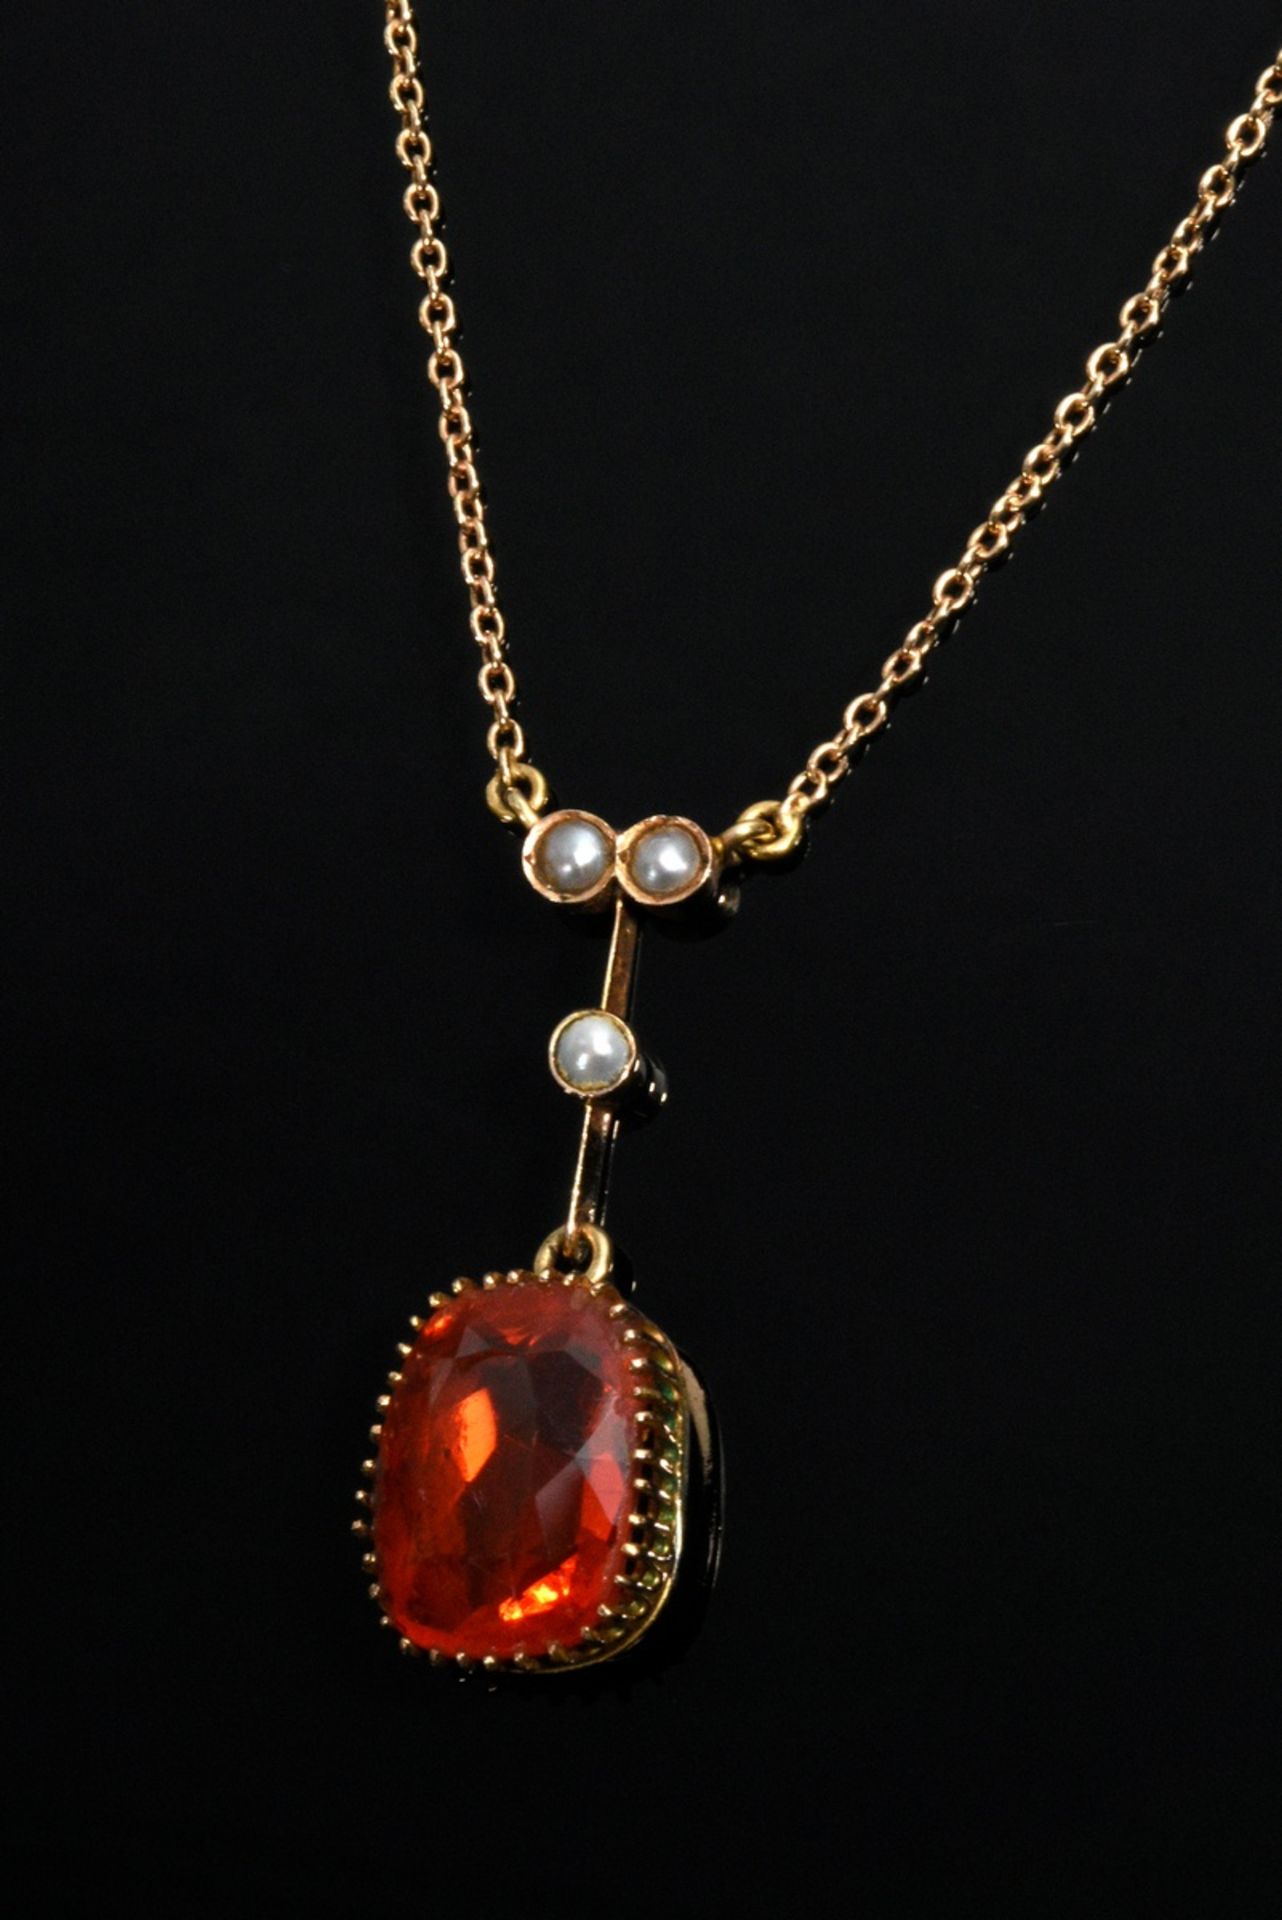 Delicate rose gold 585 necklace with fire opal bar pendant (approx. 5ct, l. 3cm) and small seed pea